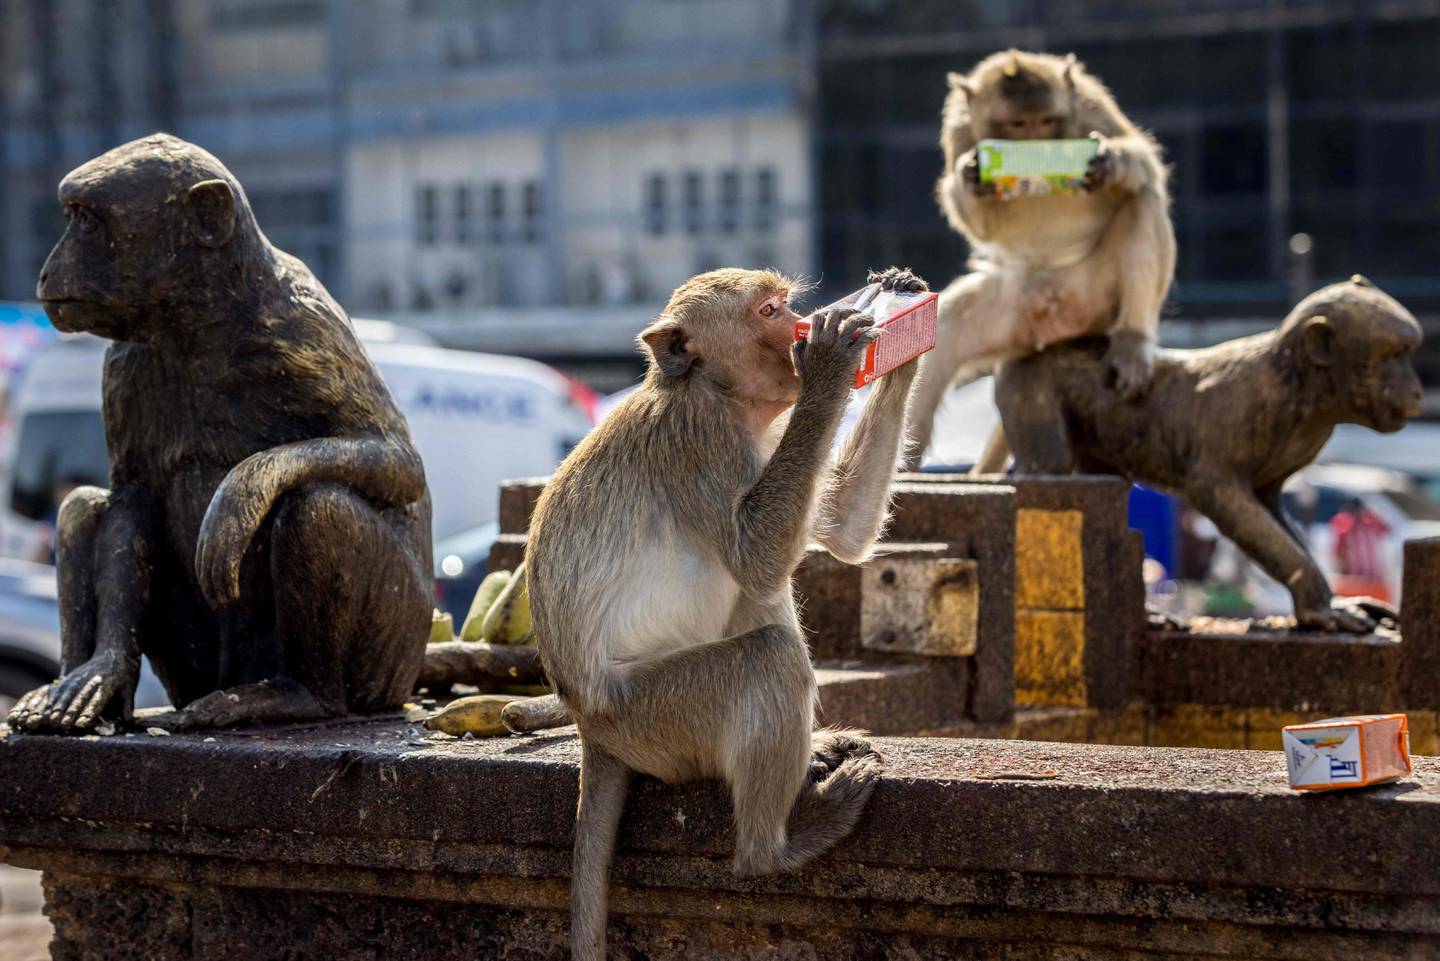 Macaque monkeys drink from juice cartons in Bangkok, Thailand. AFP